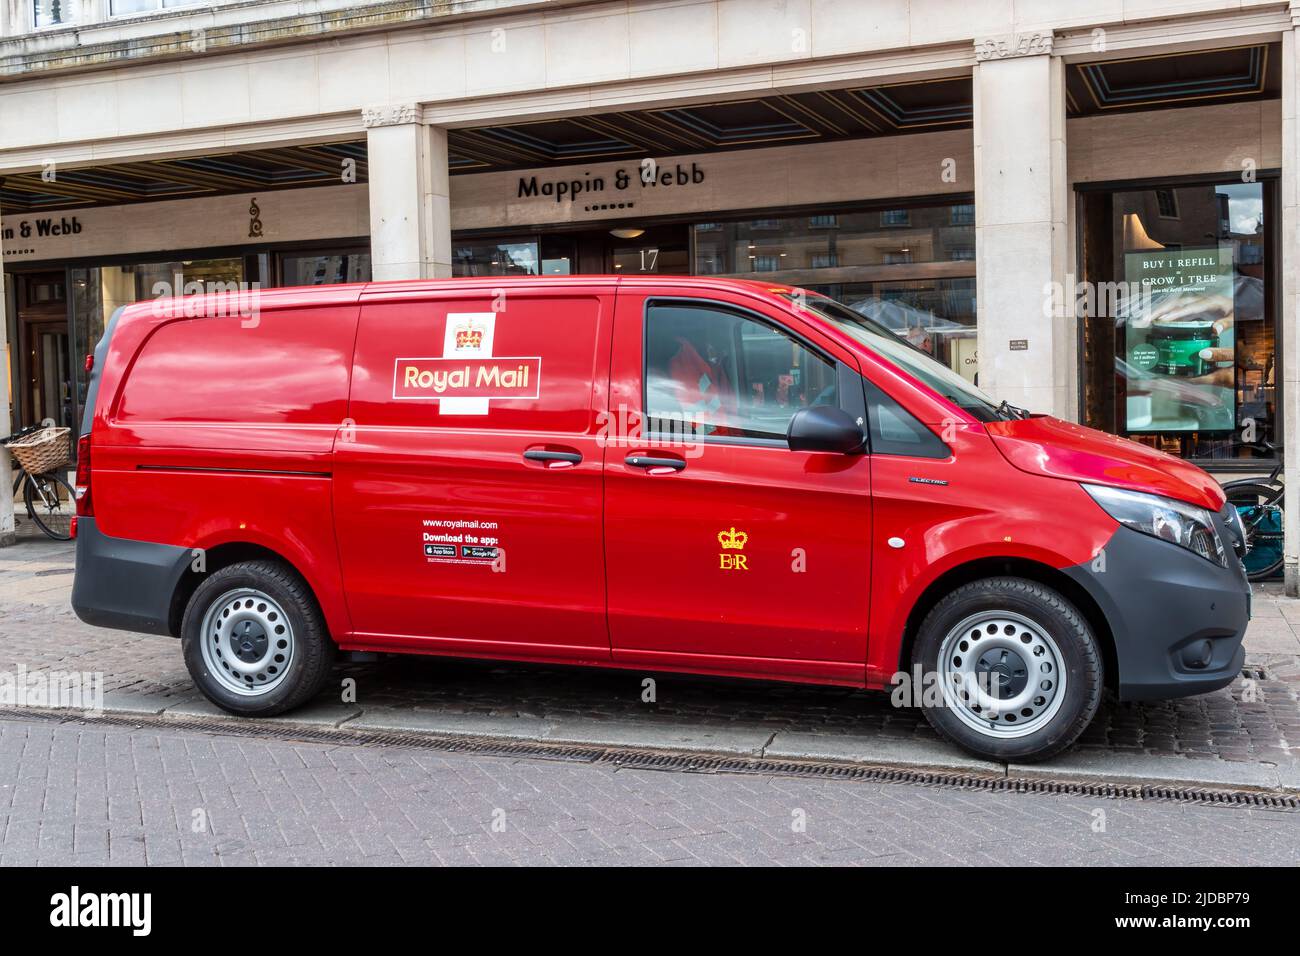 A modern, red, Royal Mail postal van parked in a retail area, Cambridge, UK Stock Photo